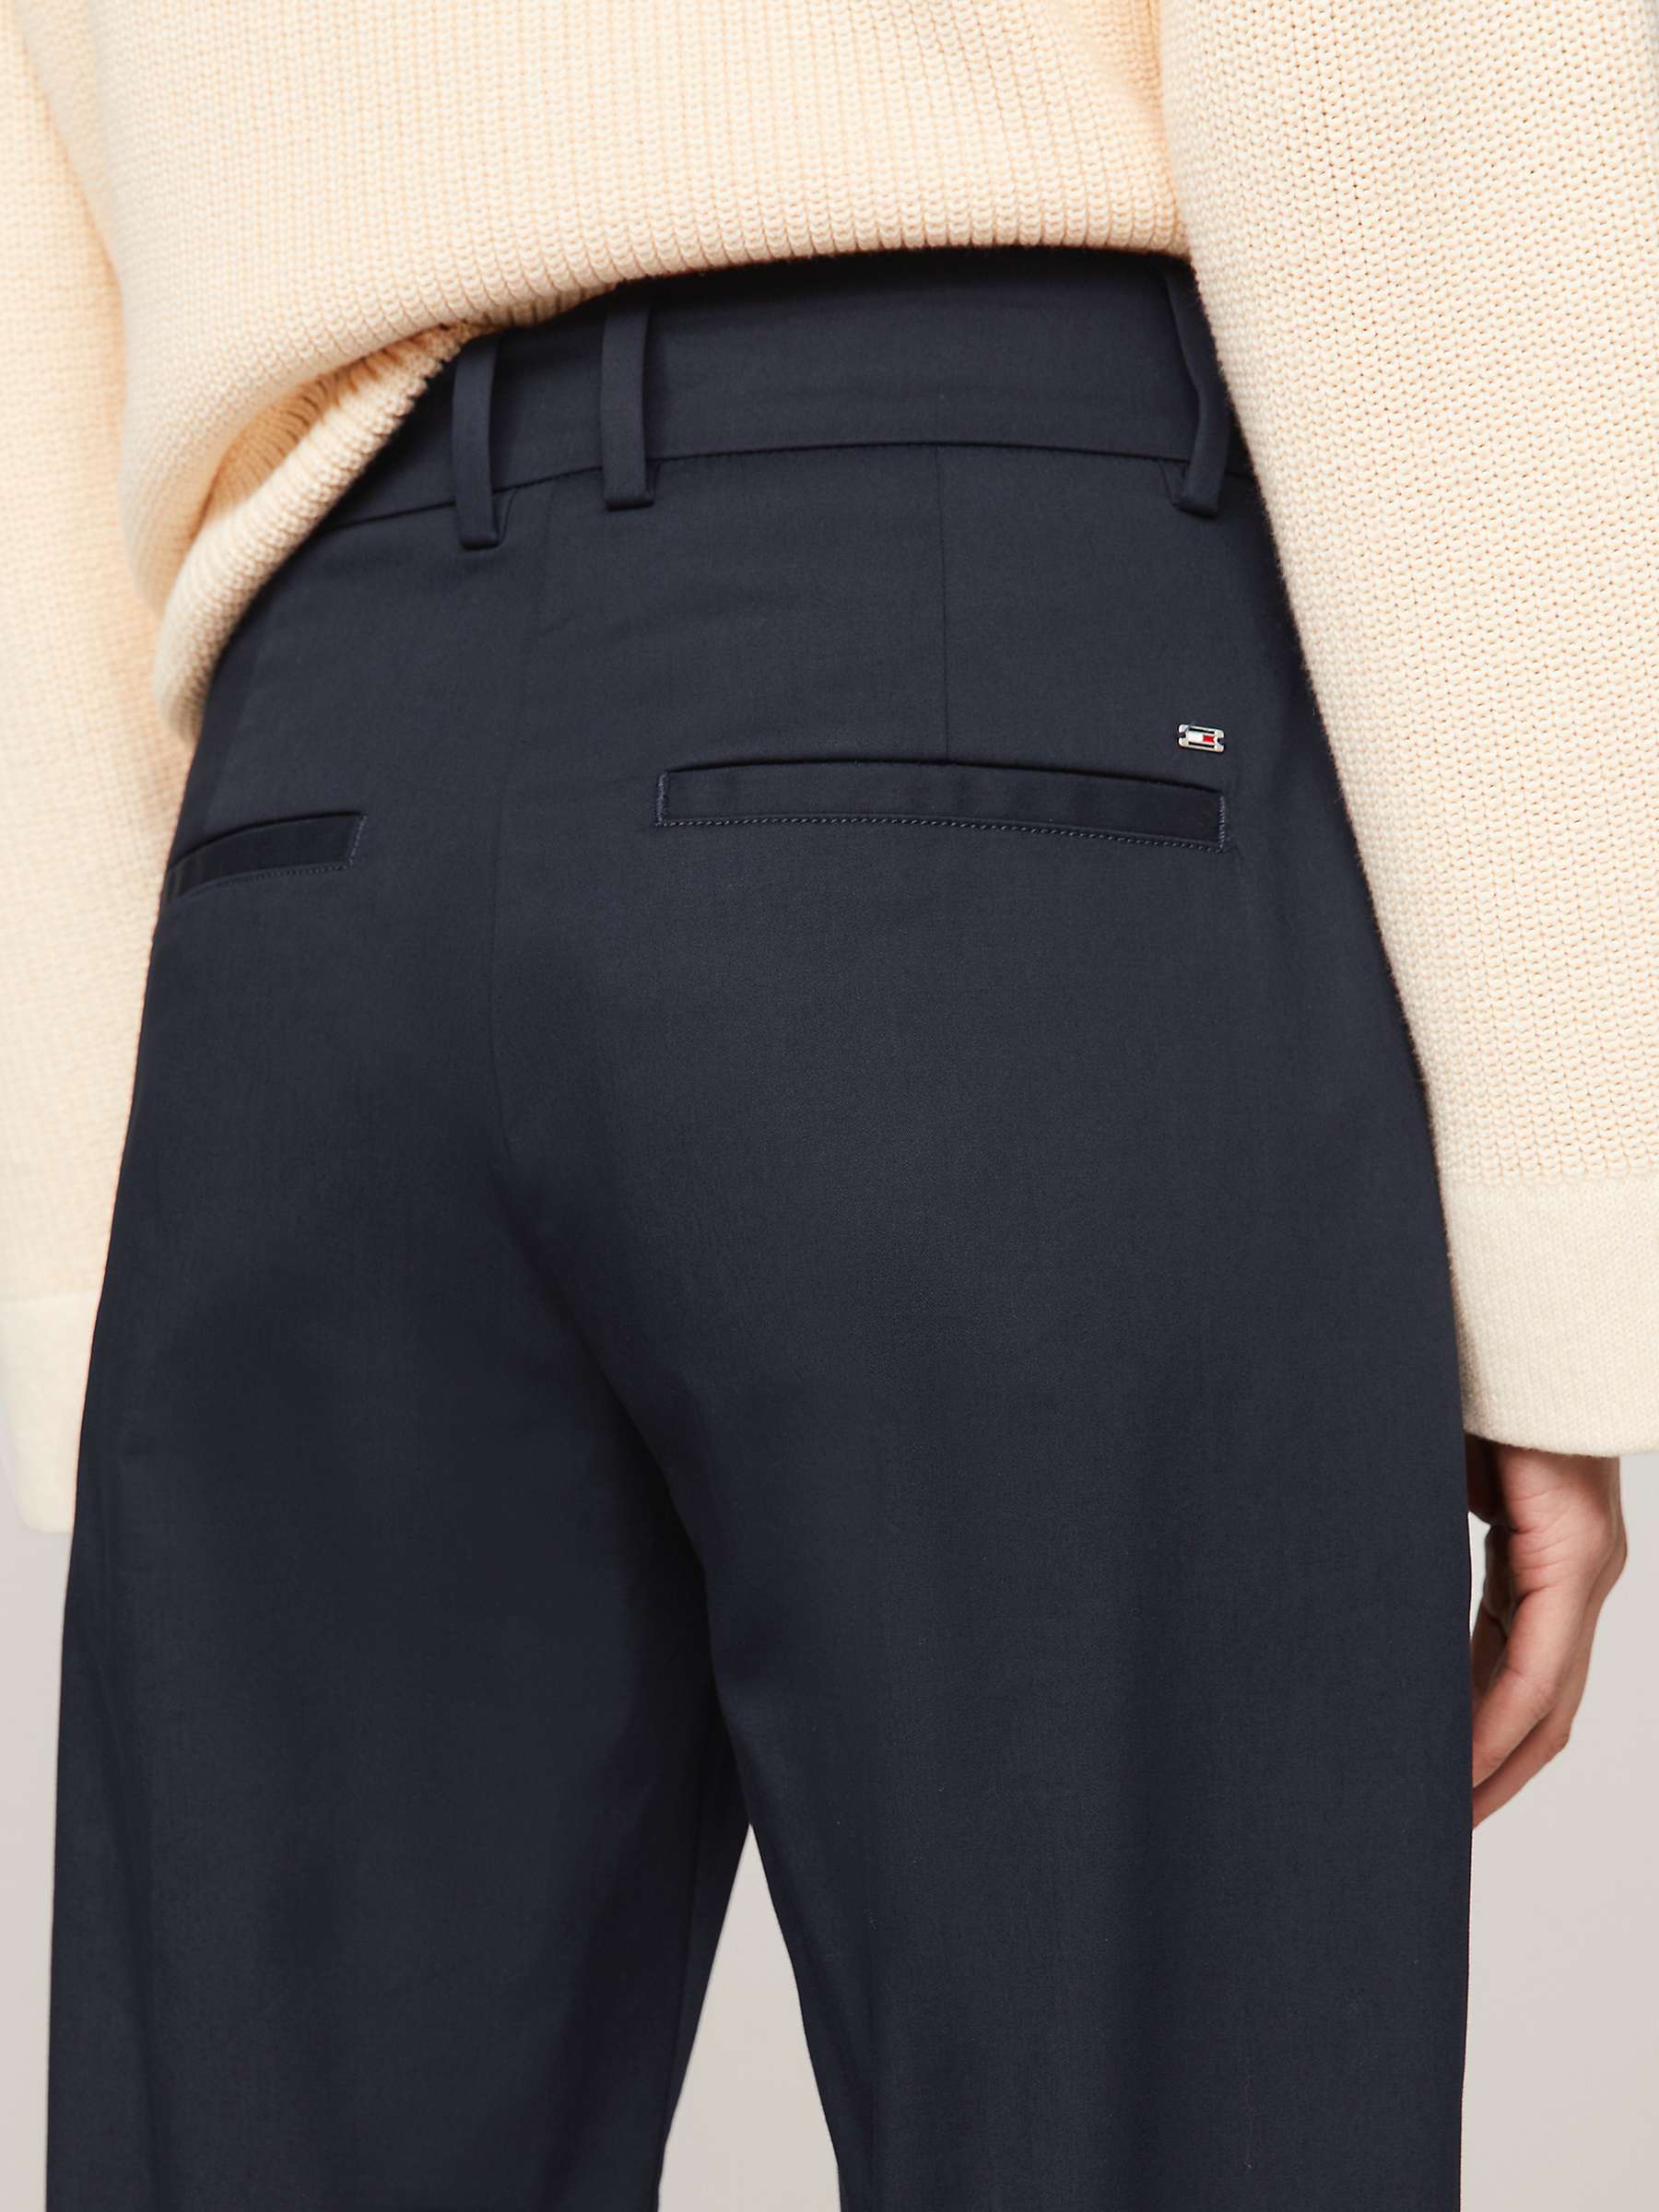 Buy Tommy Hilfiger Straight Leg Chinos Online at johnlewis.com